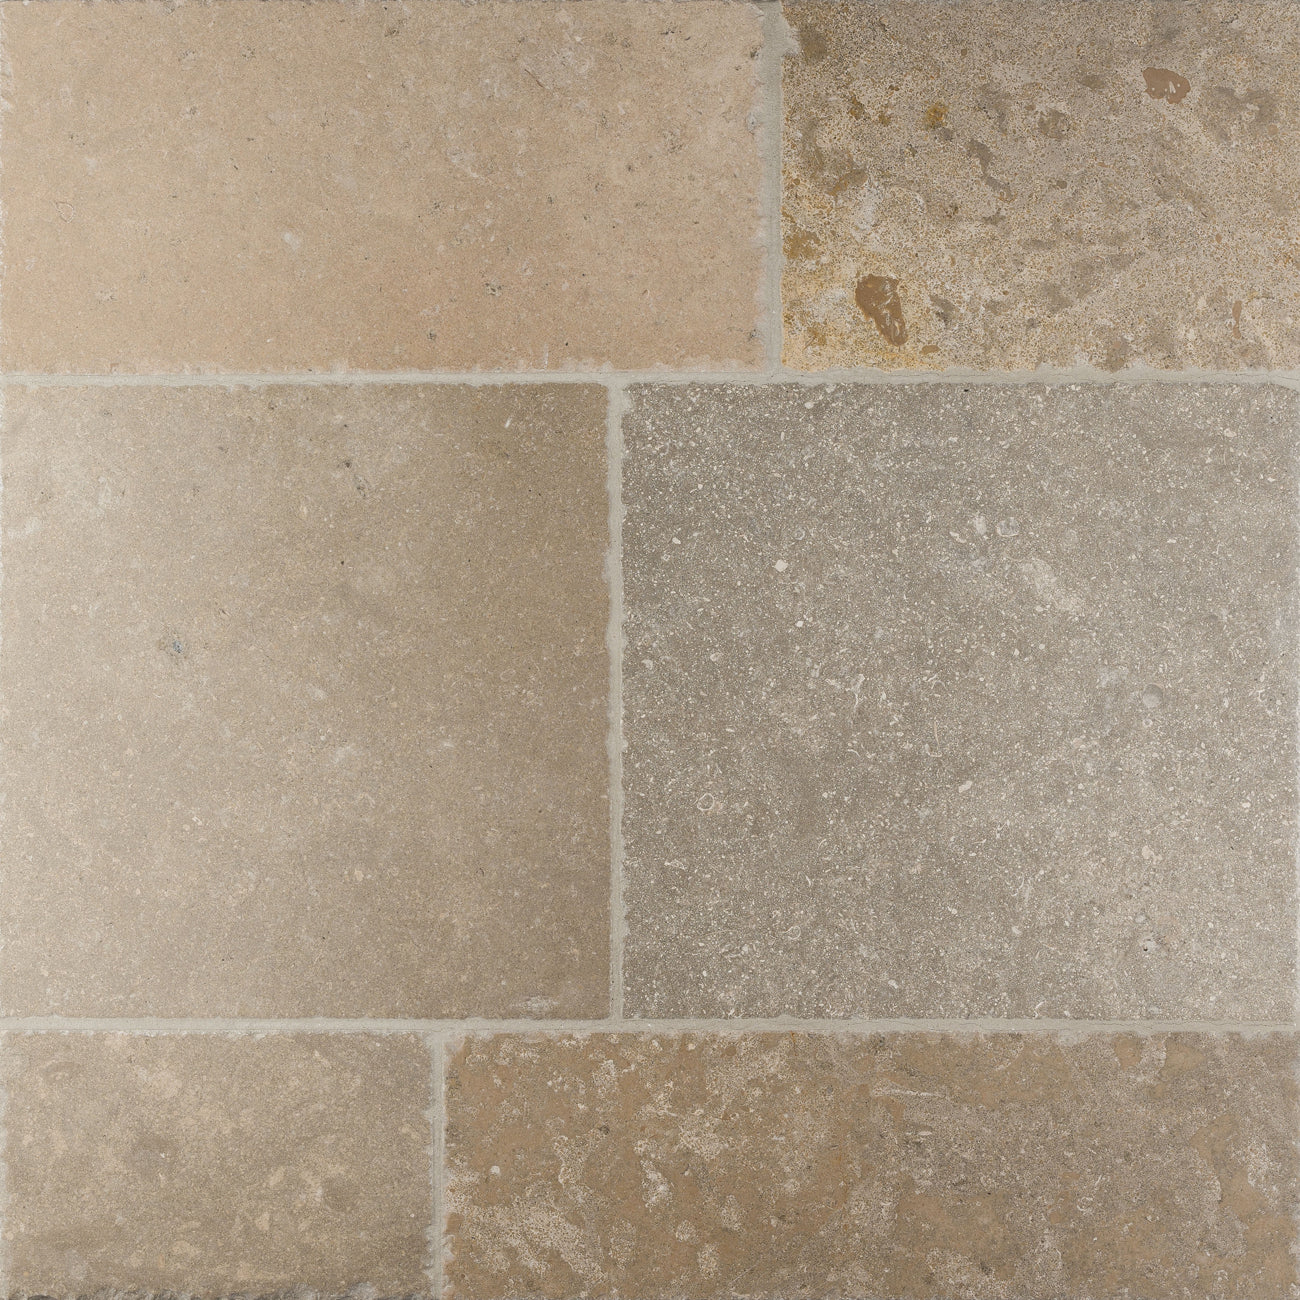 bordeaux gris limestone gray stone tile  sold by surface group